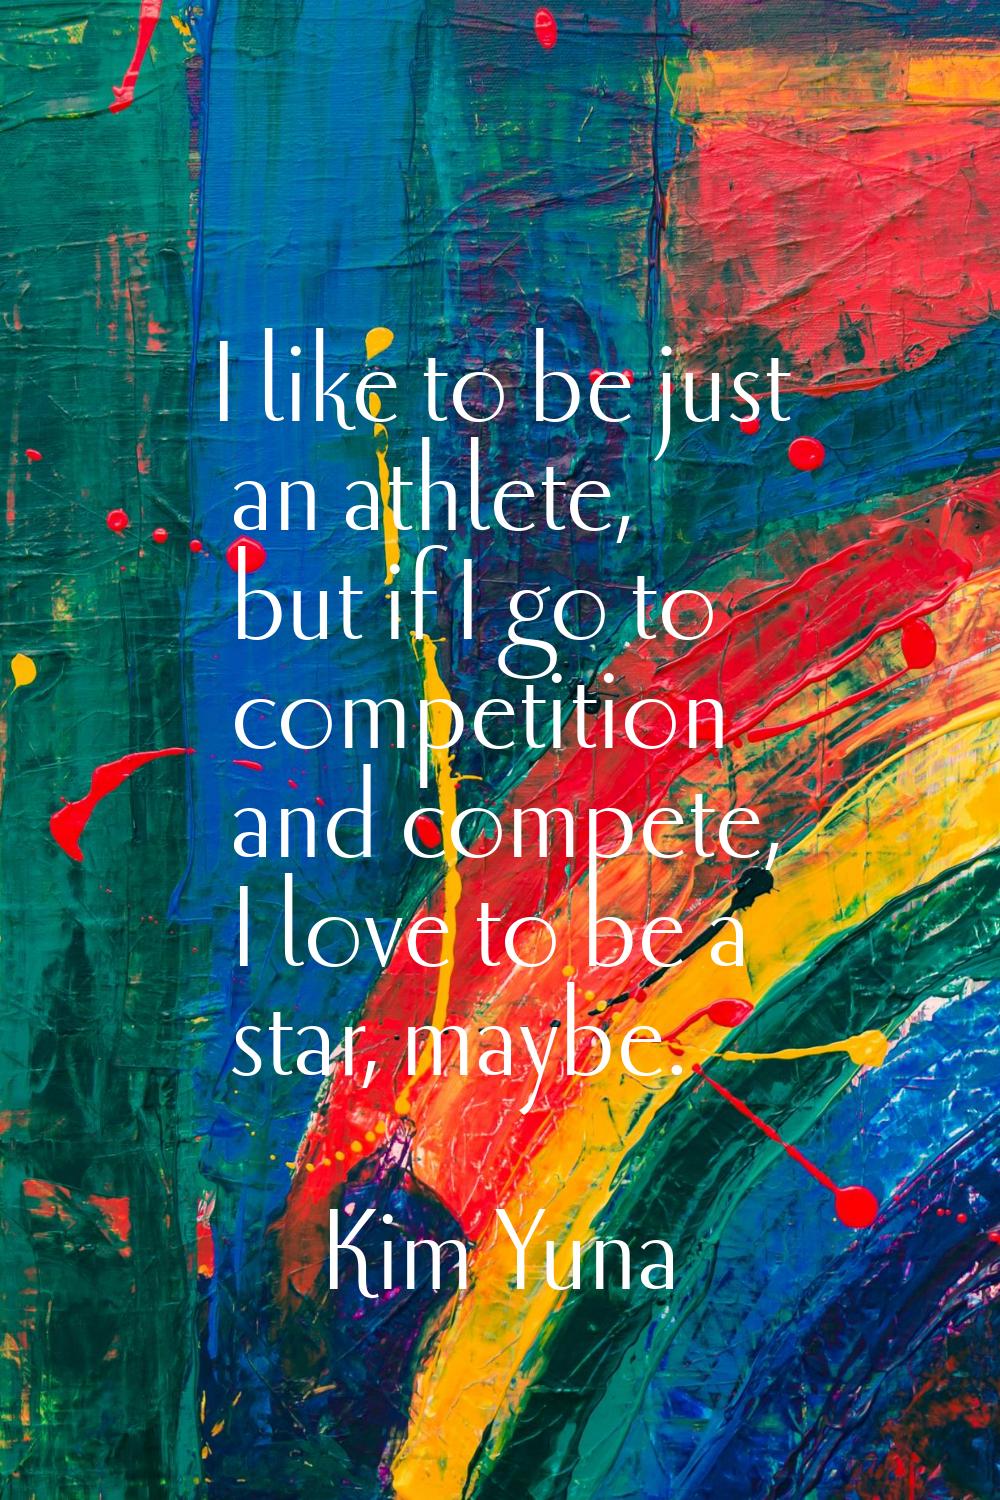 I like to be just an athlete, but if I go to competition and compete, I love to be a star, maybe.